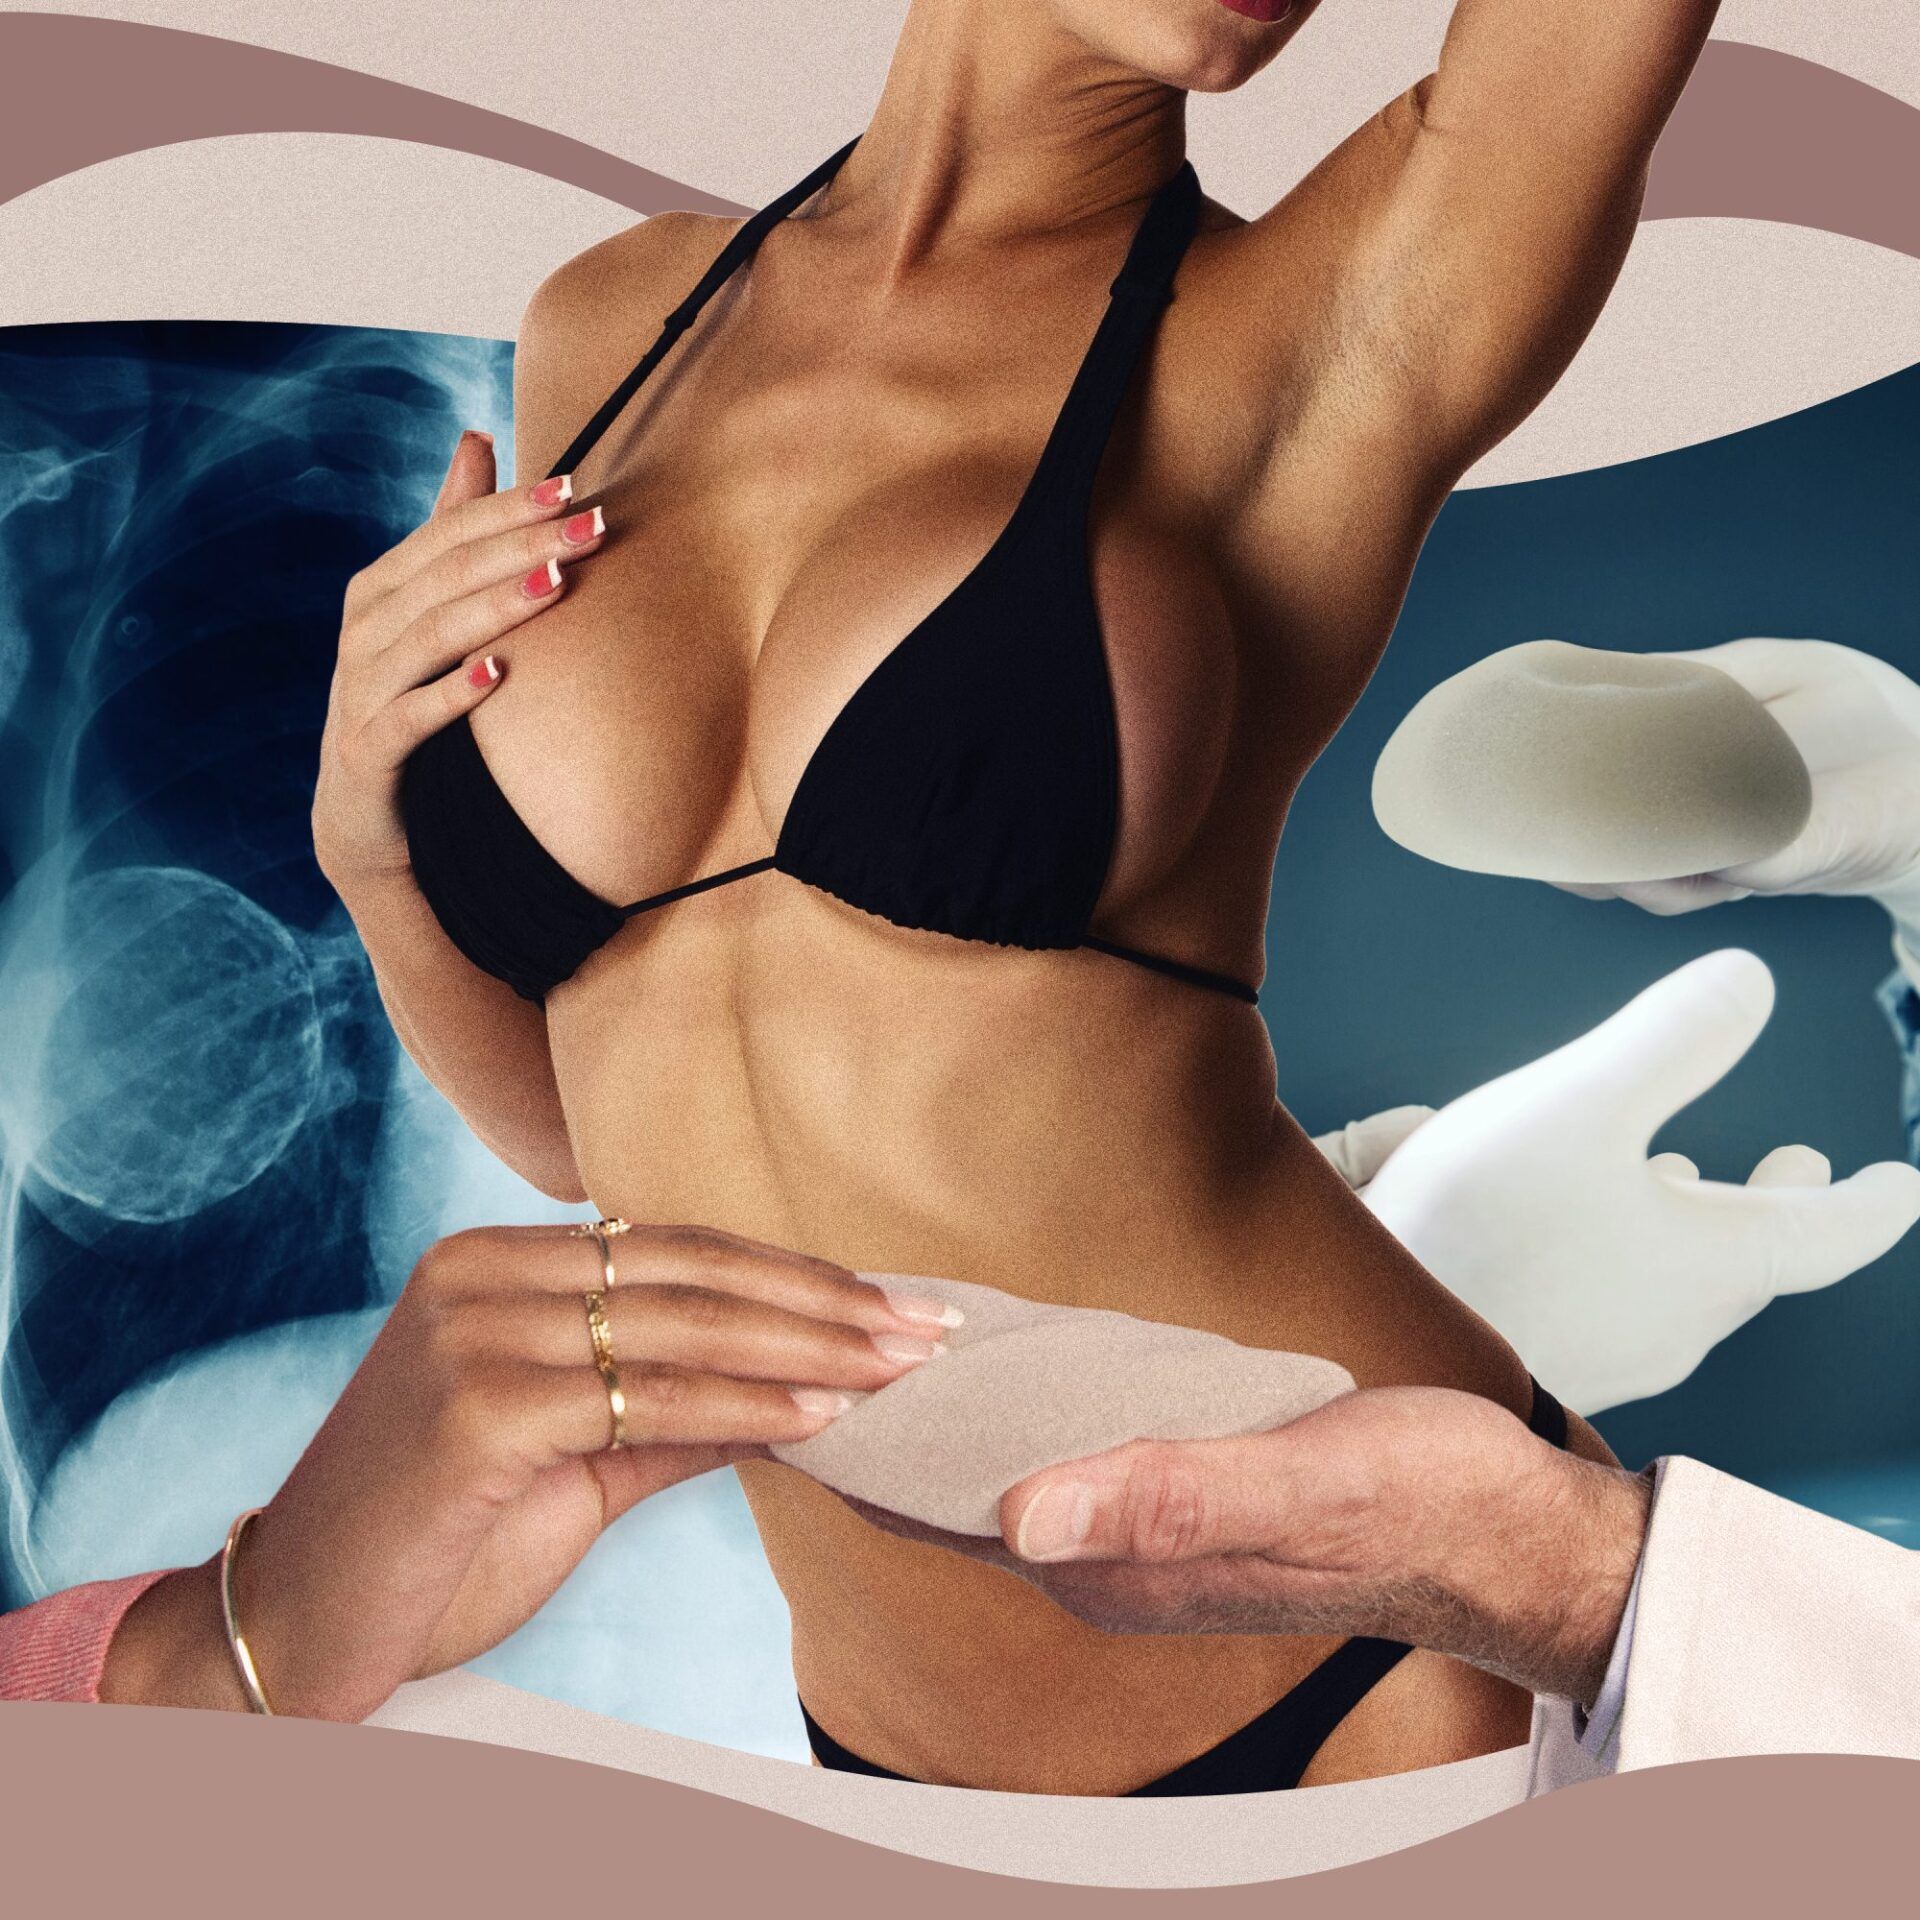 transformation aesthetic solutions, Breast Augmentation, Breast Lift, Breast Implants, Cosmetic Surgery, Breast Surgeon, Breast Reconstruction